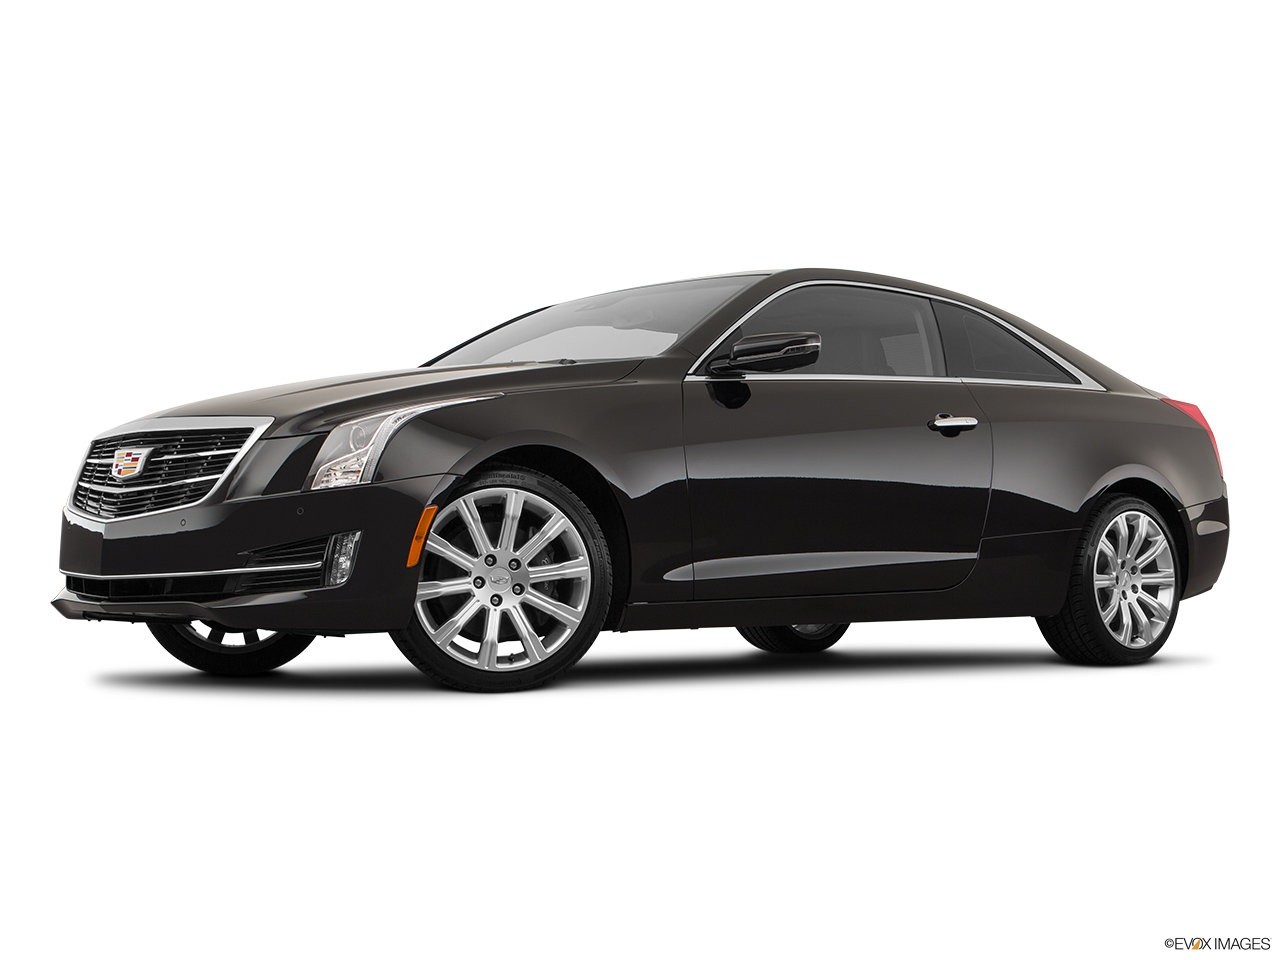 2019 Cadillac ATS Luxury Low/wide front 5/8. 